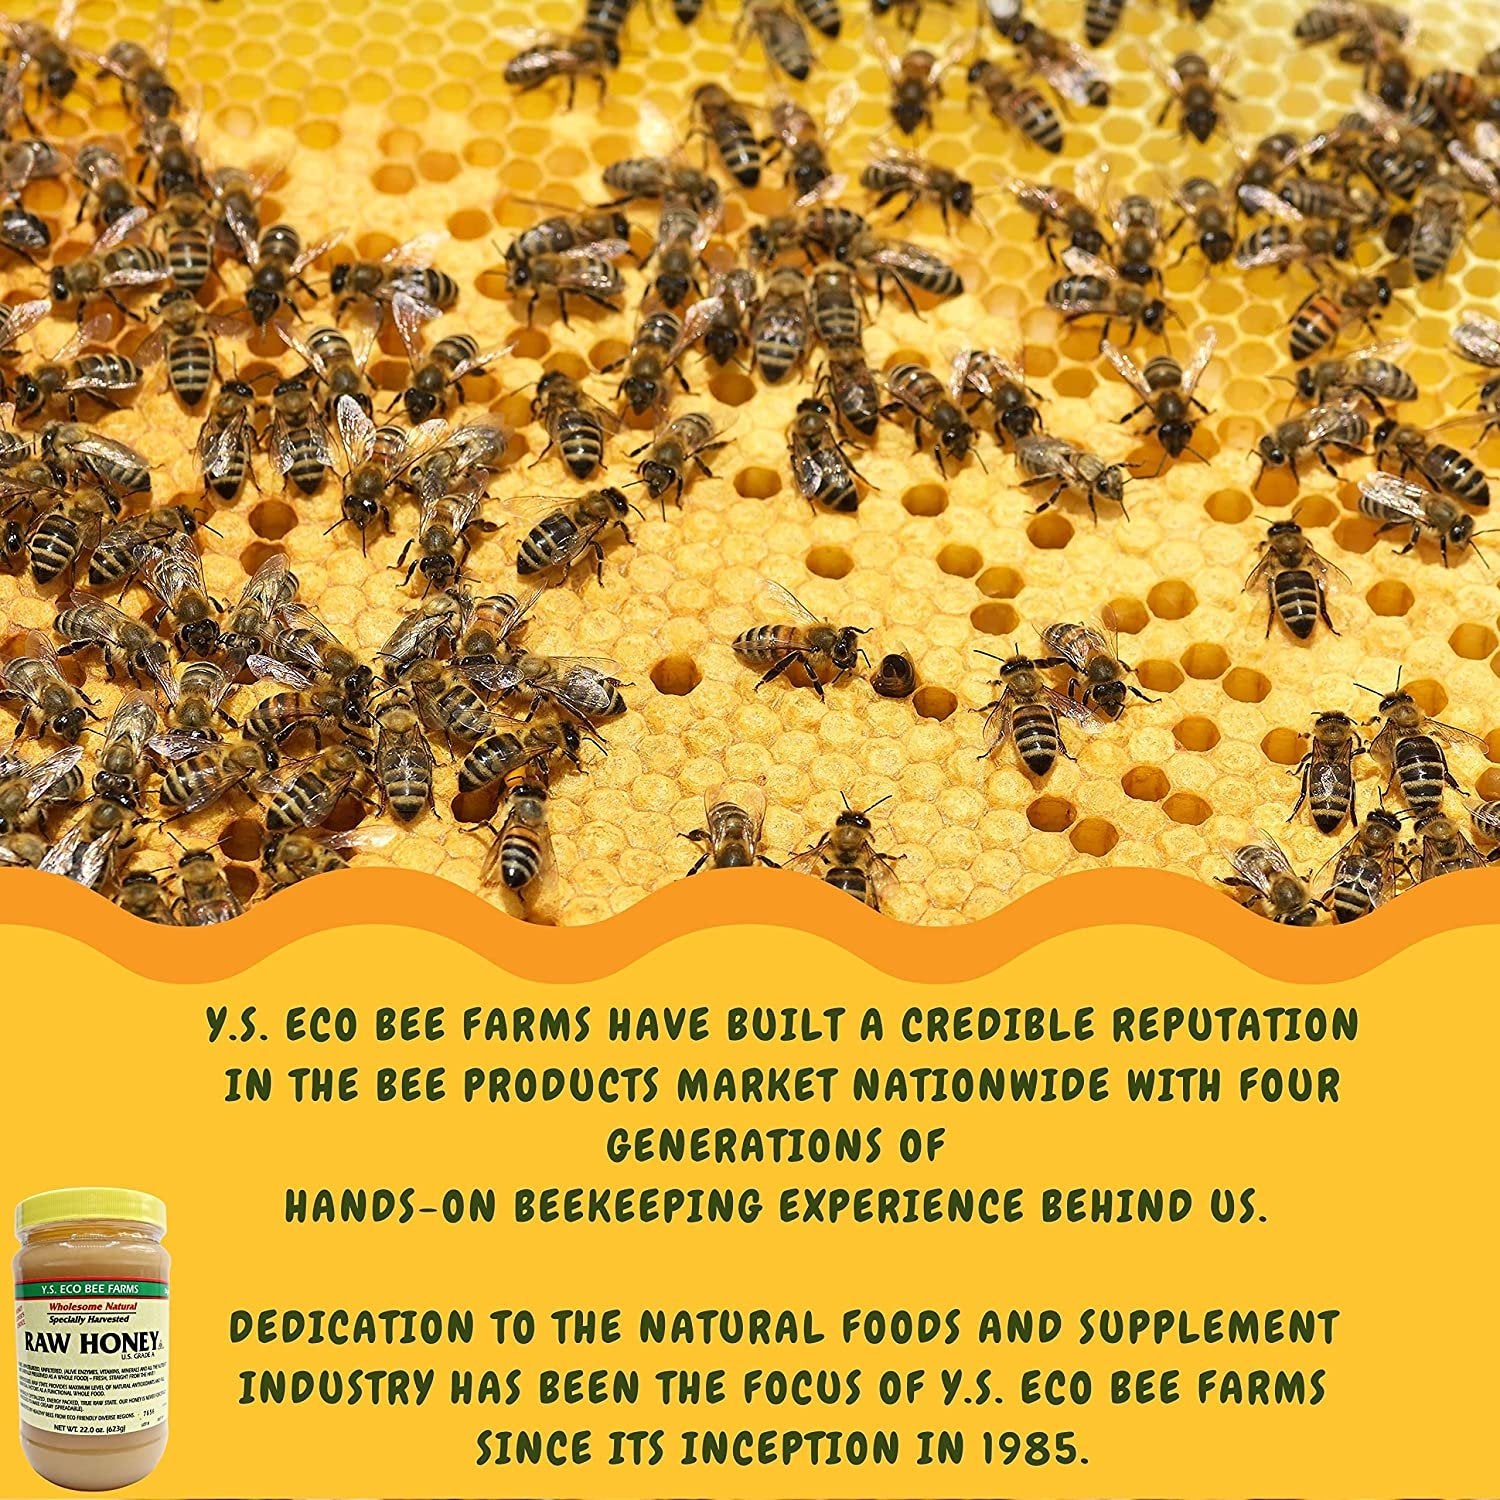 Y.S. Eco Bee Farms, Y.S. Organic Bee Farms, Natural Raw Honey, Unpasteurized, Unfiltered, Fresh Raw State, Kosher, Pure, Natural, Healthy, Safe, Gluten Free, Specially Harvested, 22oz, 1 Count